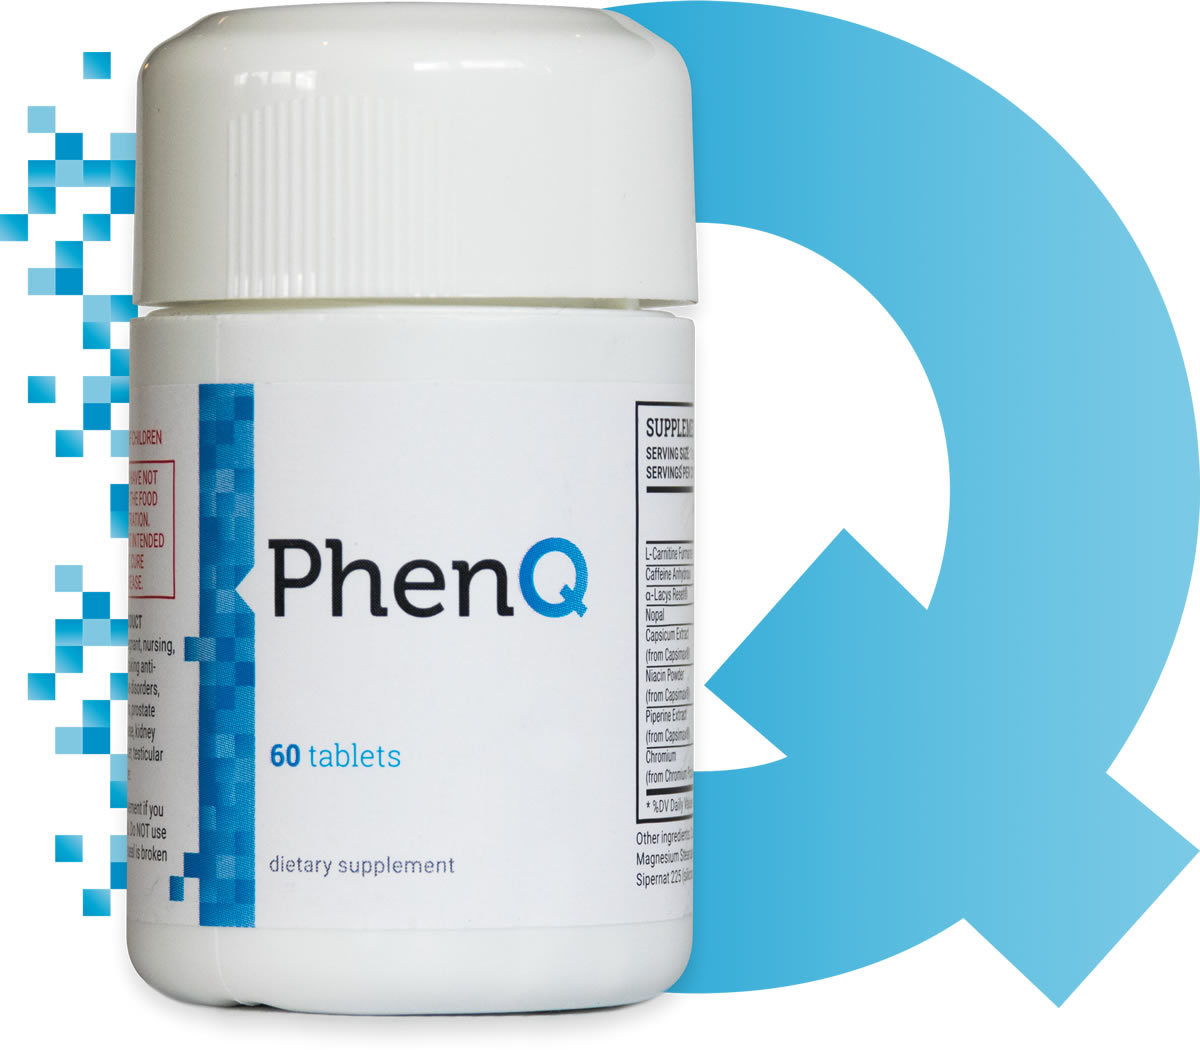 PhenQ one of the very best supplements for shredding